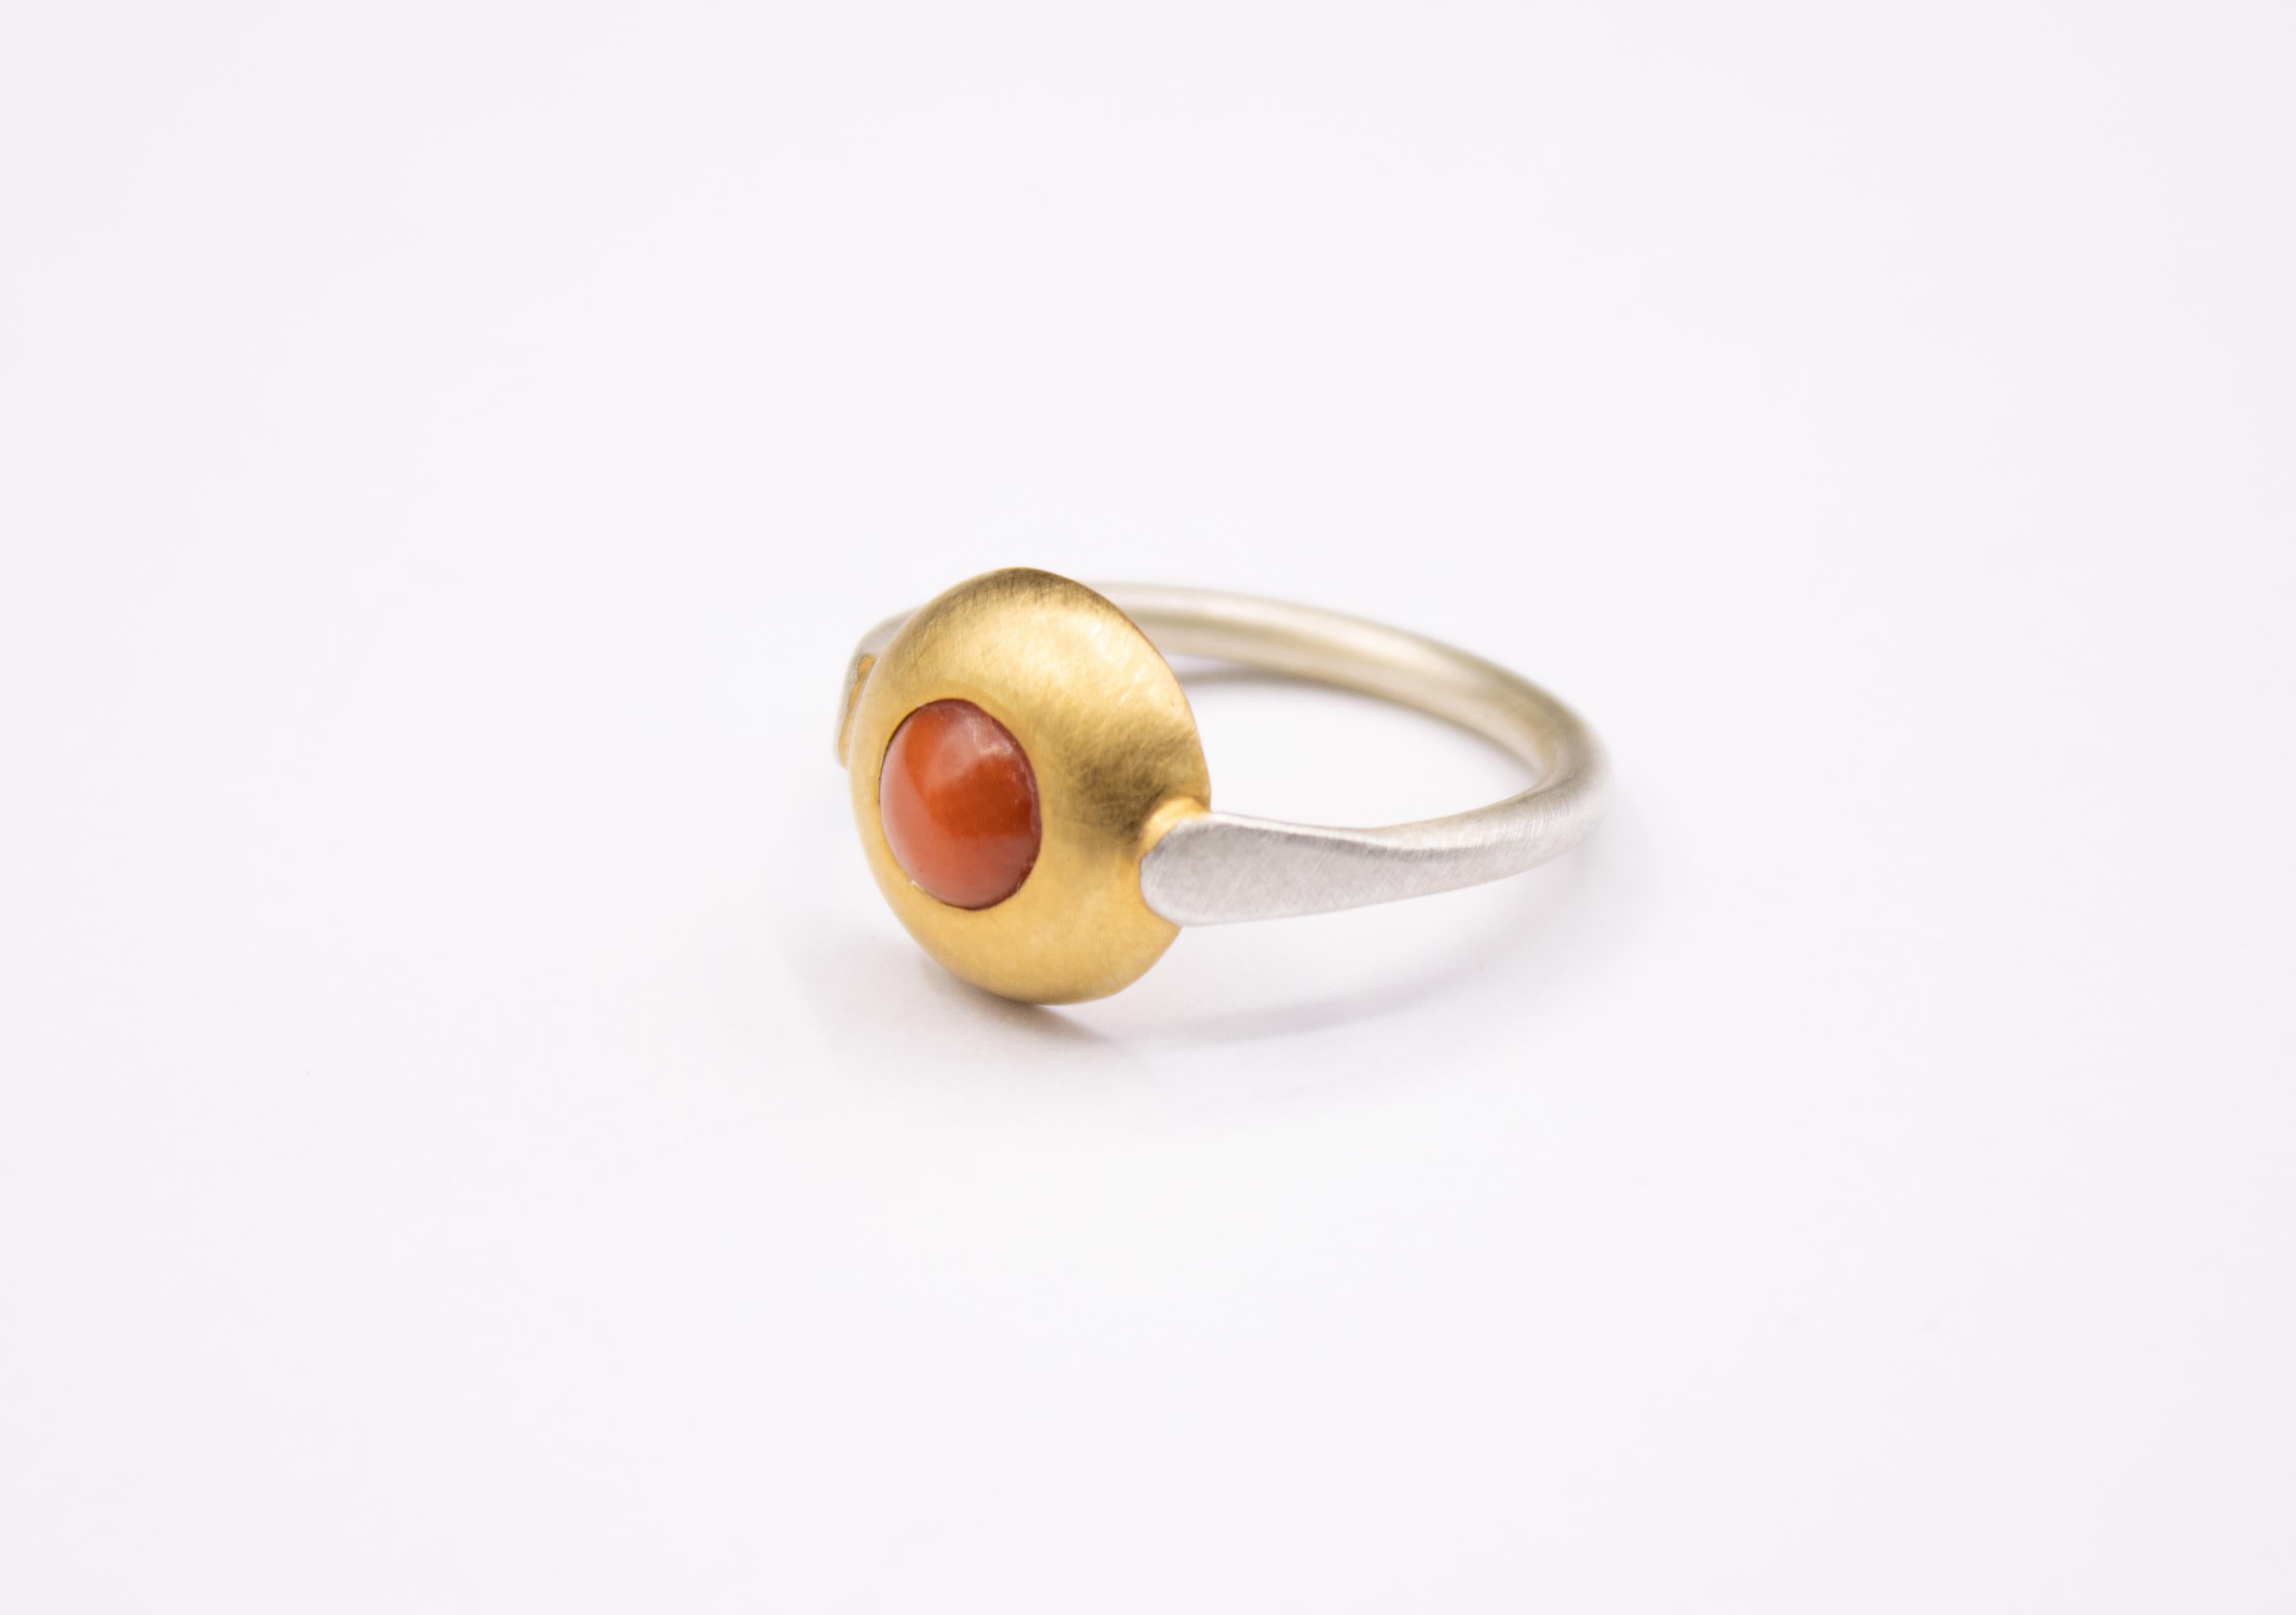 For Sale:  Monika Herré red Coral Ring Slim Sterling silver galvanic gold plating  2